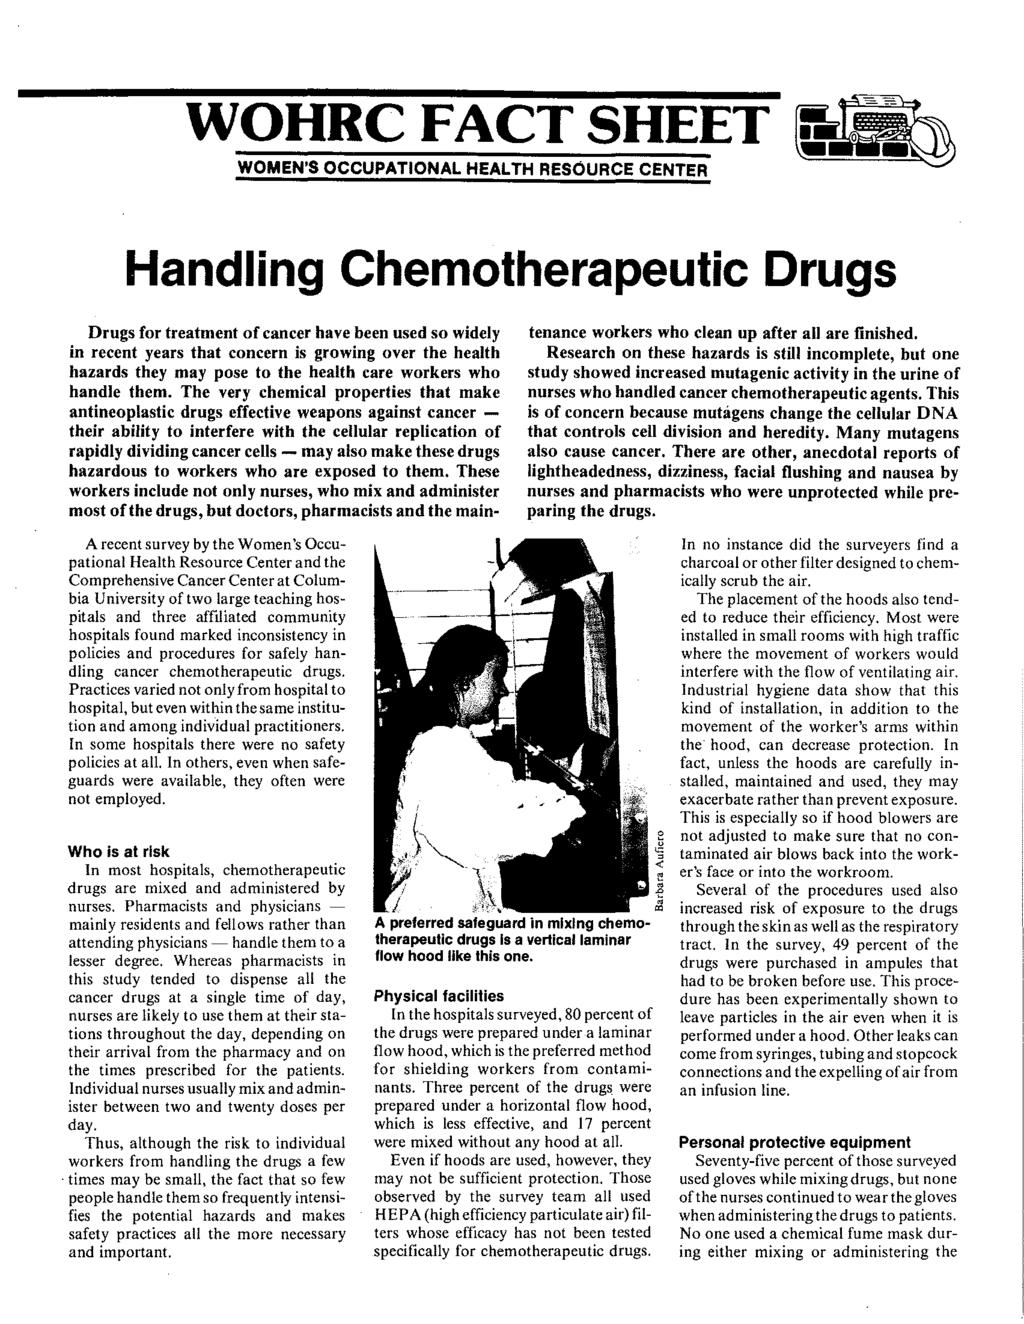 WOHRC FACT SHEET WOMEN'S OCCUPATIONAL HEALTH RESOURCE CENTER Handling Chemotherapeutic Drugs Drugs for treatment of cancer have been used so widely in recent years that concern is growing over the